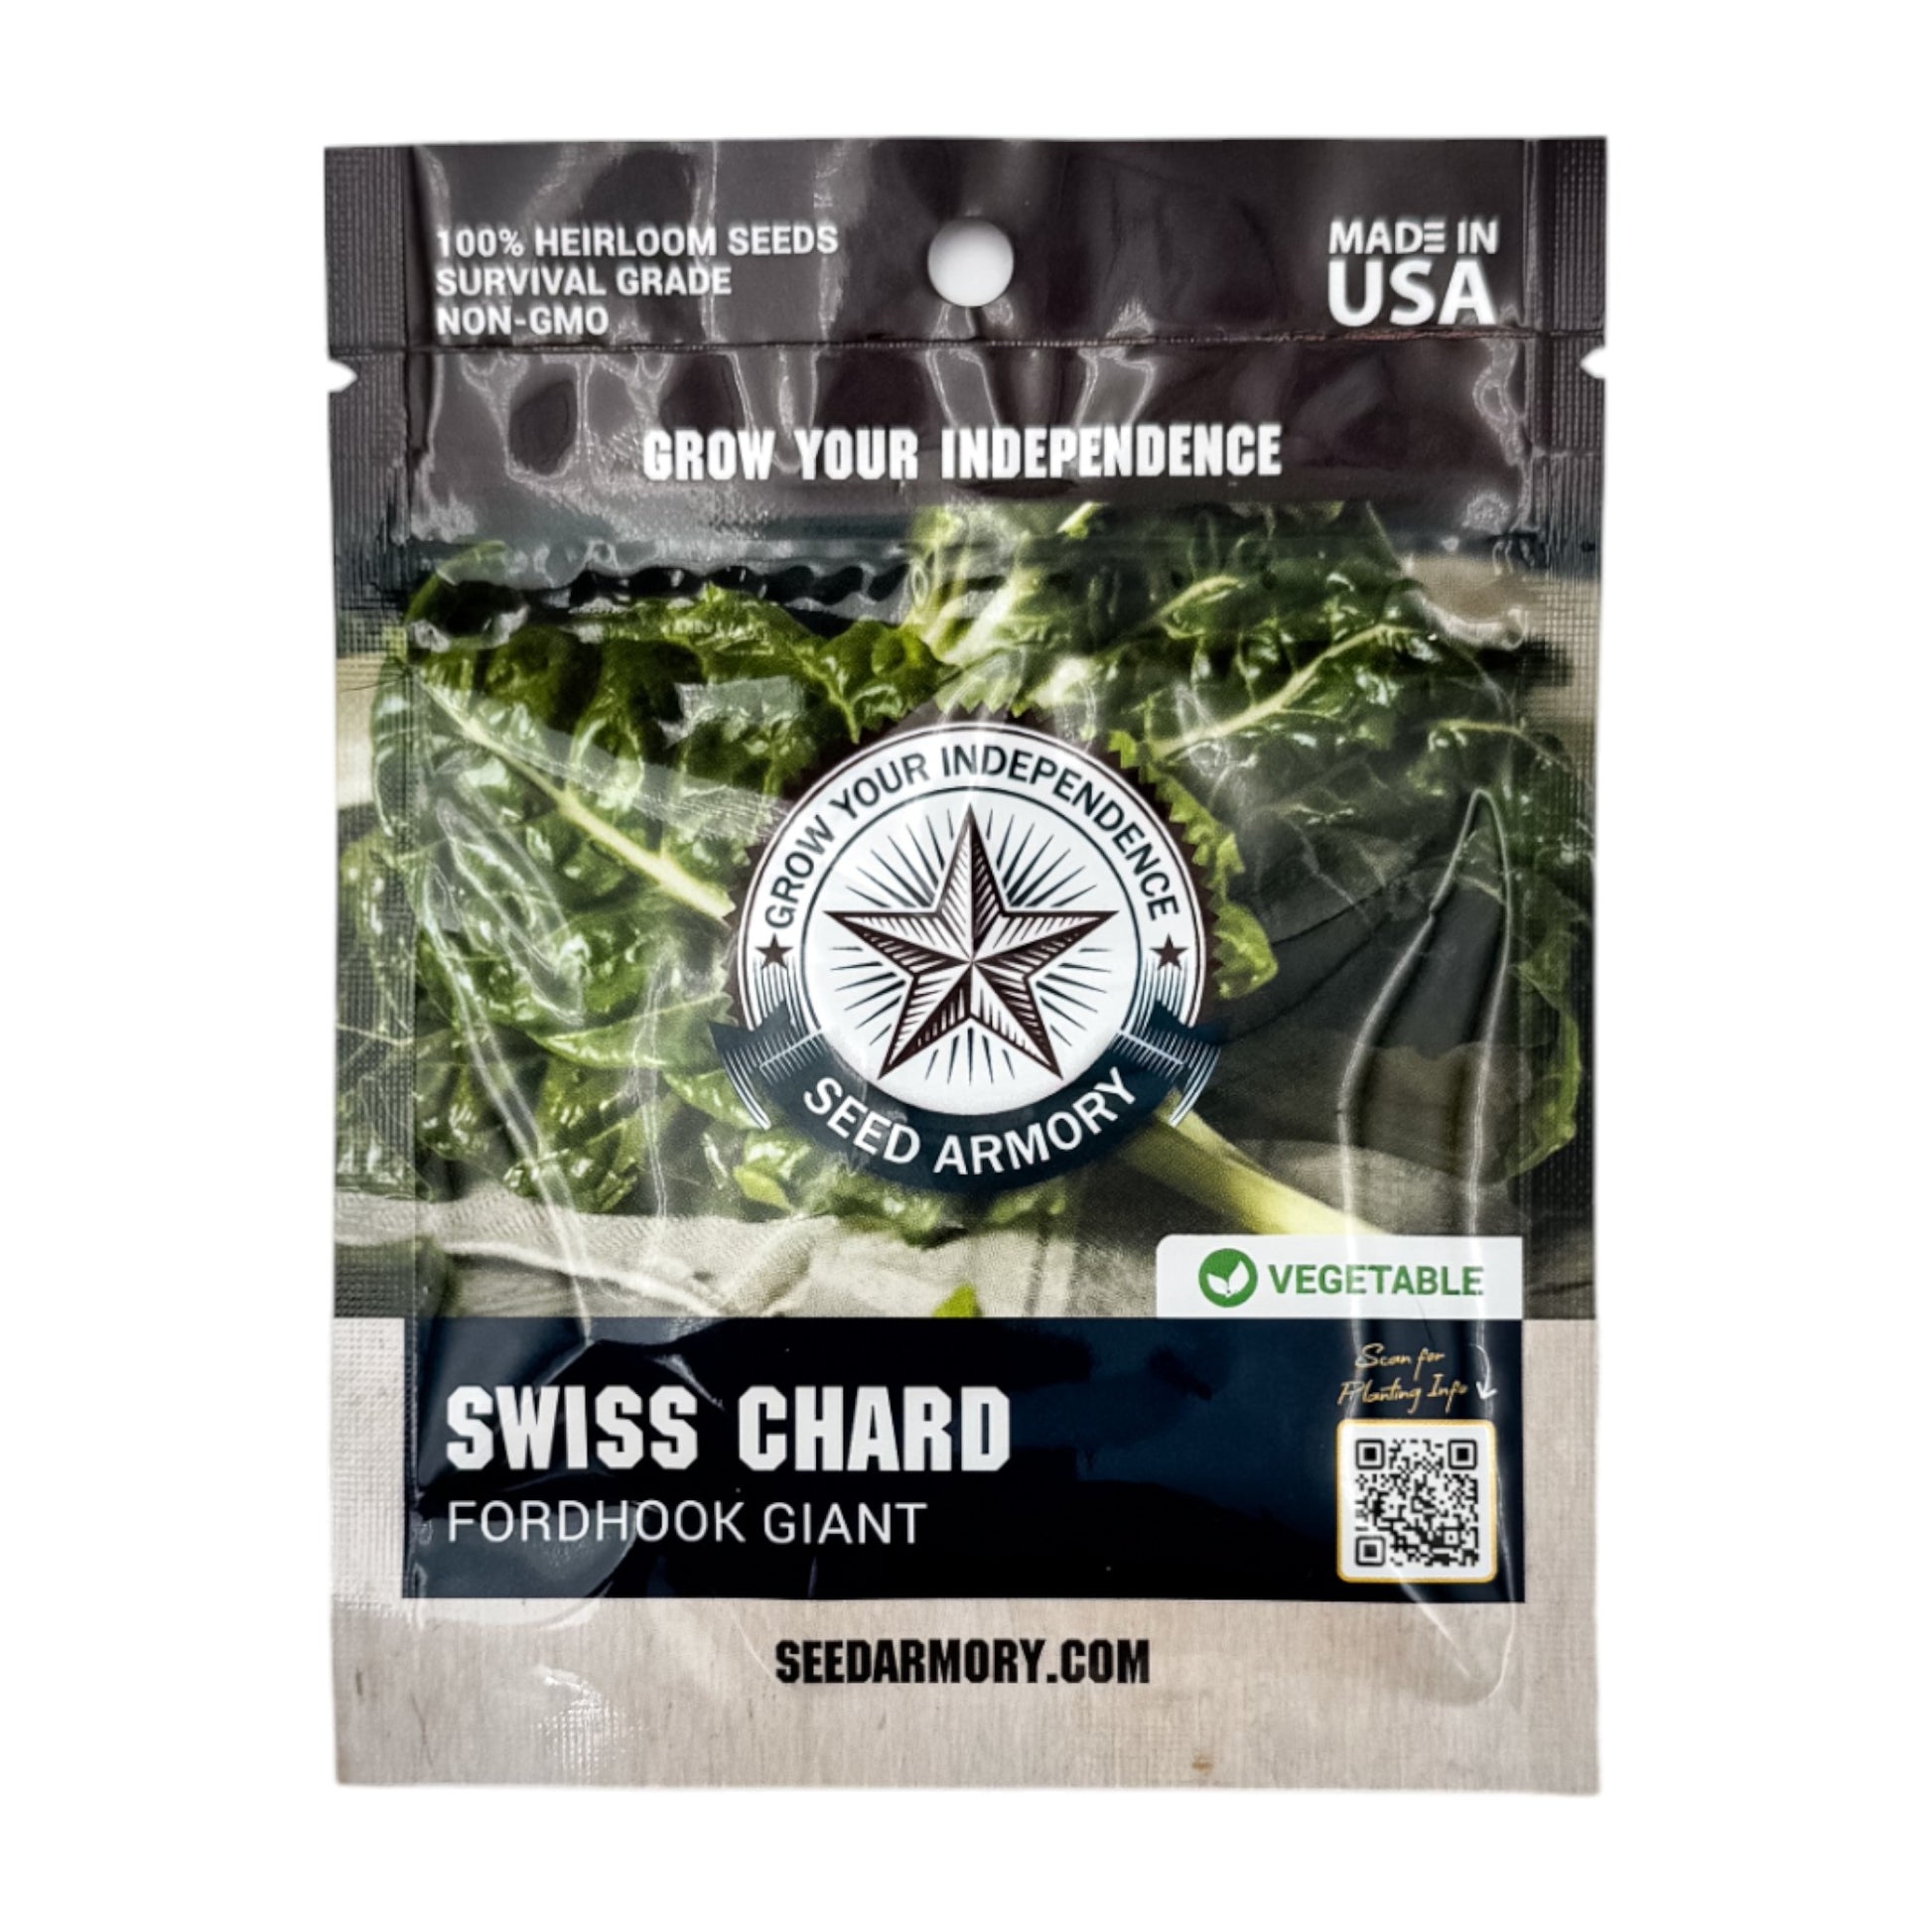 Front packet of 'Fordhook Giant' Swiss chard heirloom seeds